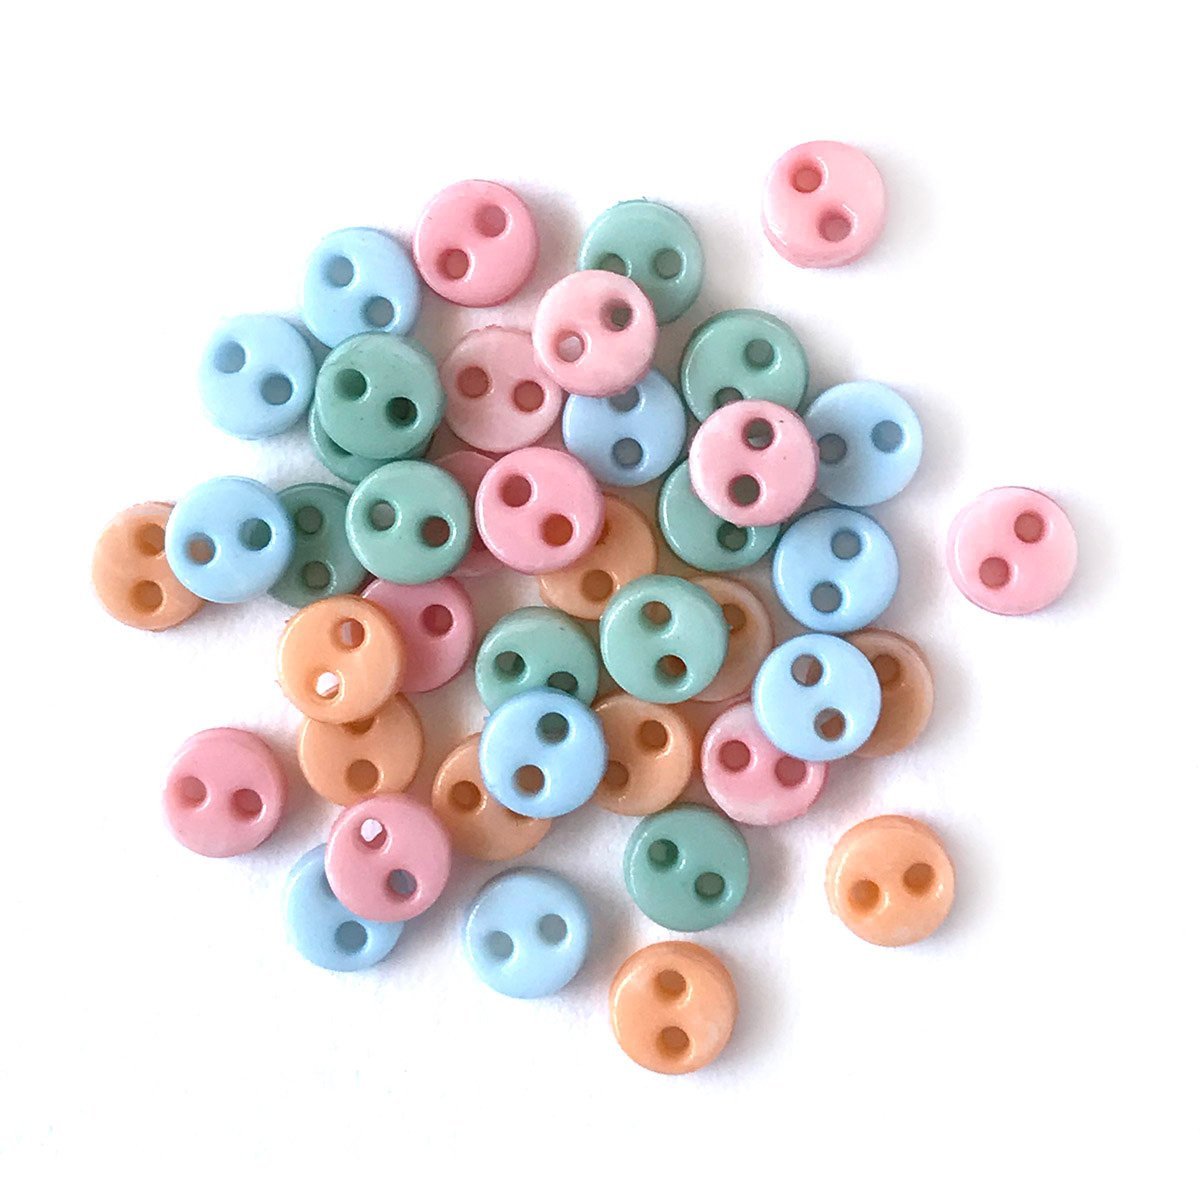 B205 Tiny 3mm Buttons Micro Mini Buttons Tiny Buttons Doll Buttons Doll  Sewing Craft Supplies 